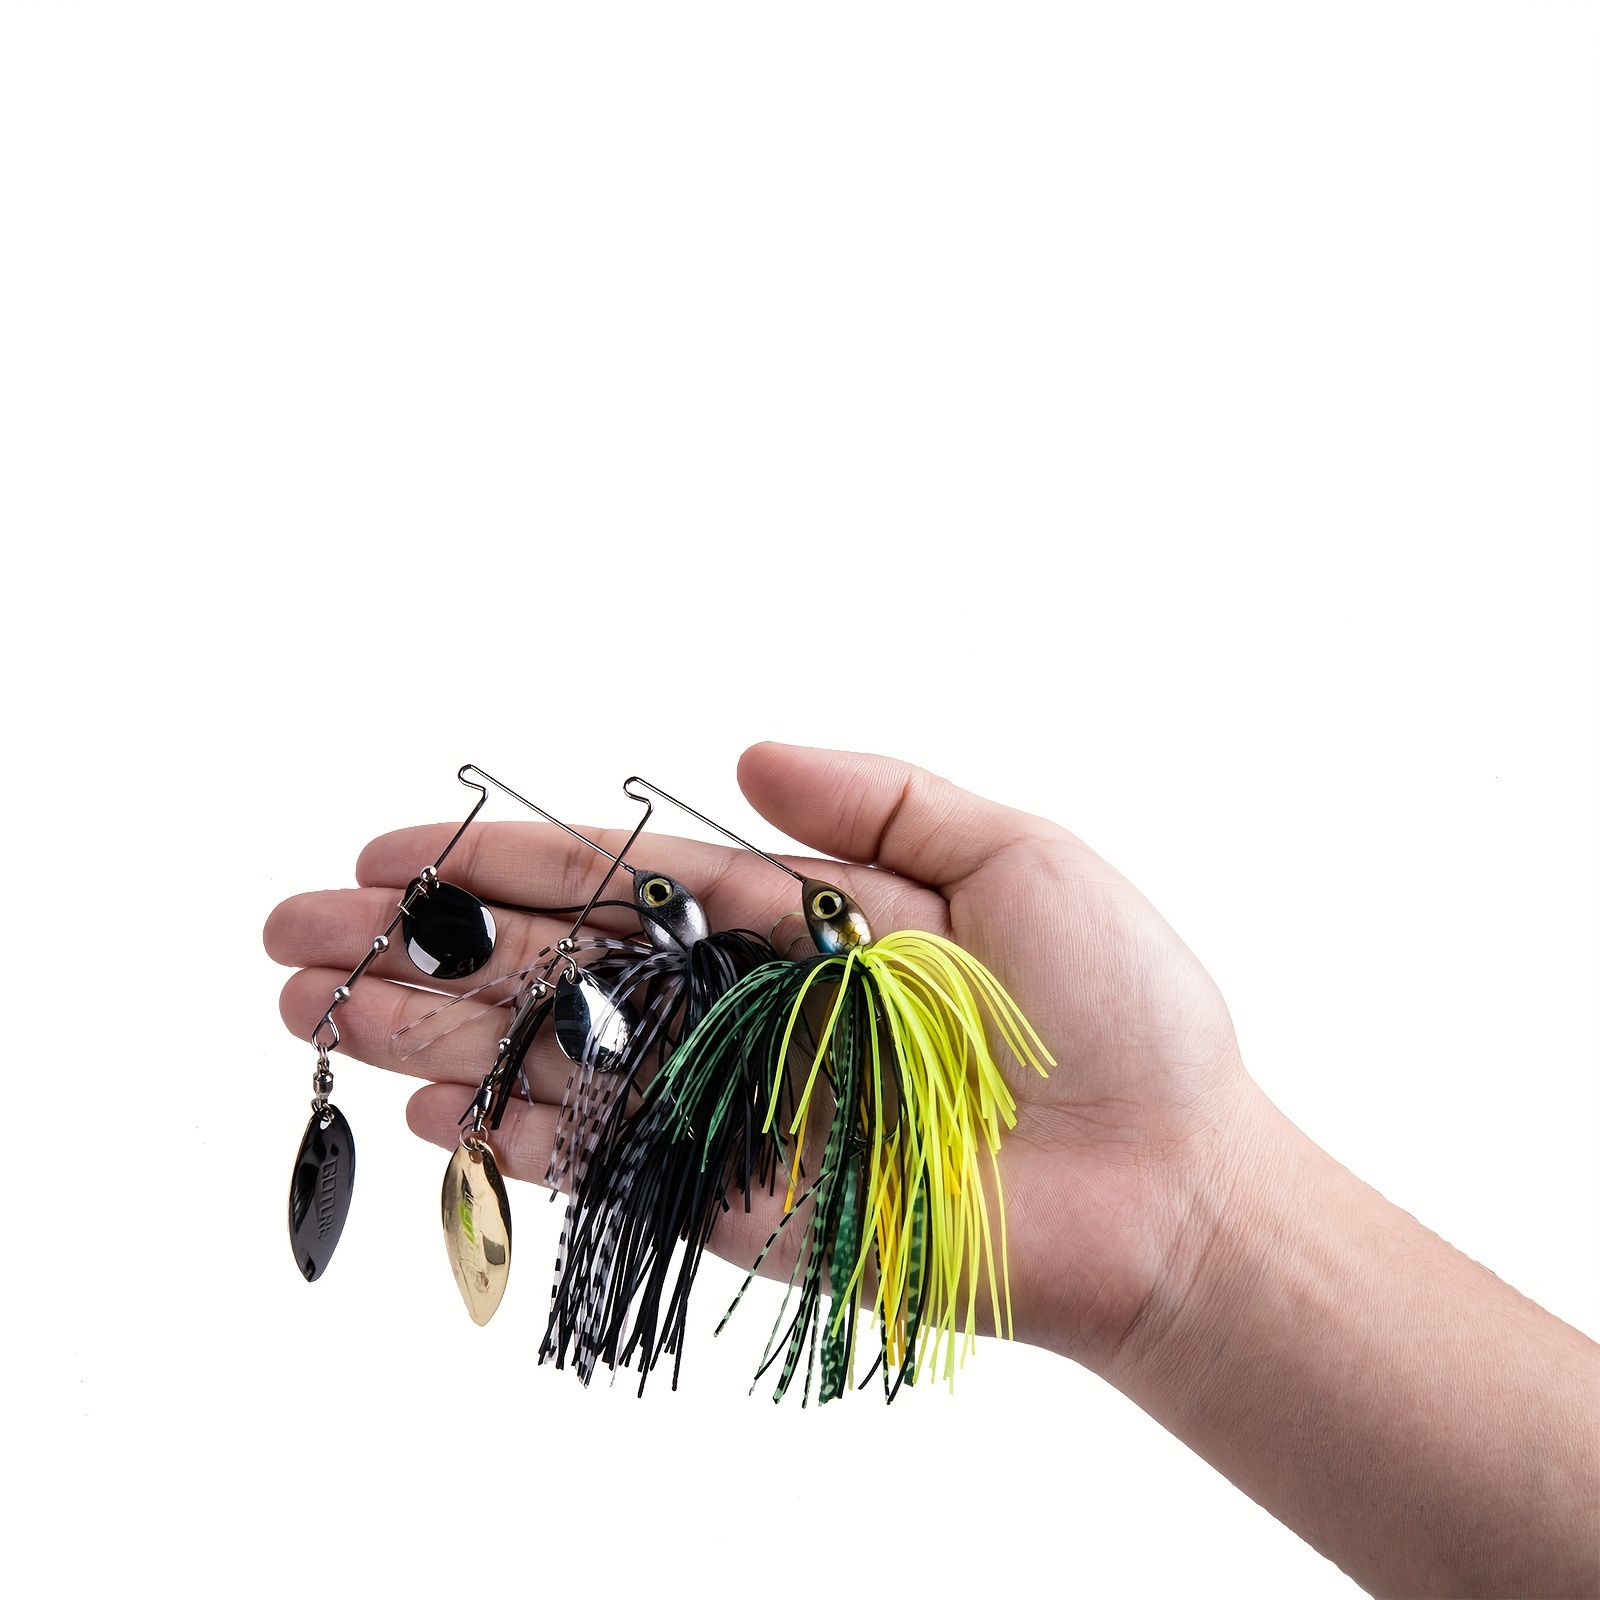 TAIGEKBladed Jigs,trout lures,fishing lures,spinner baits,bass